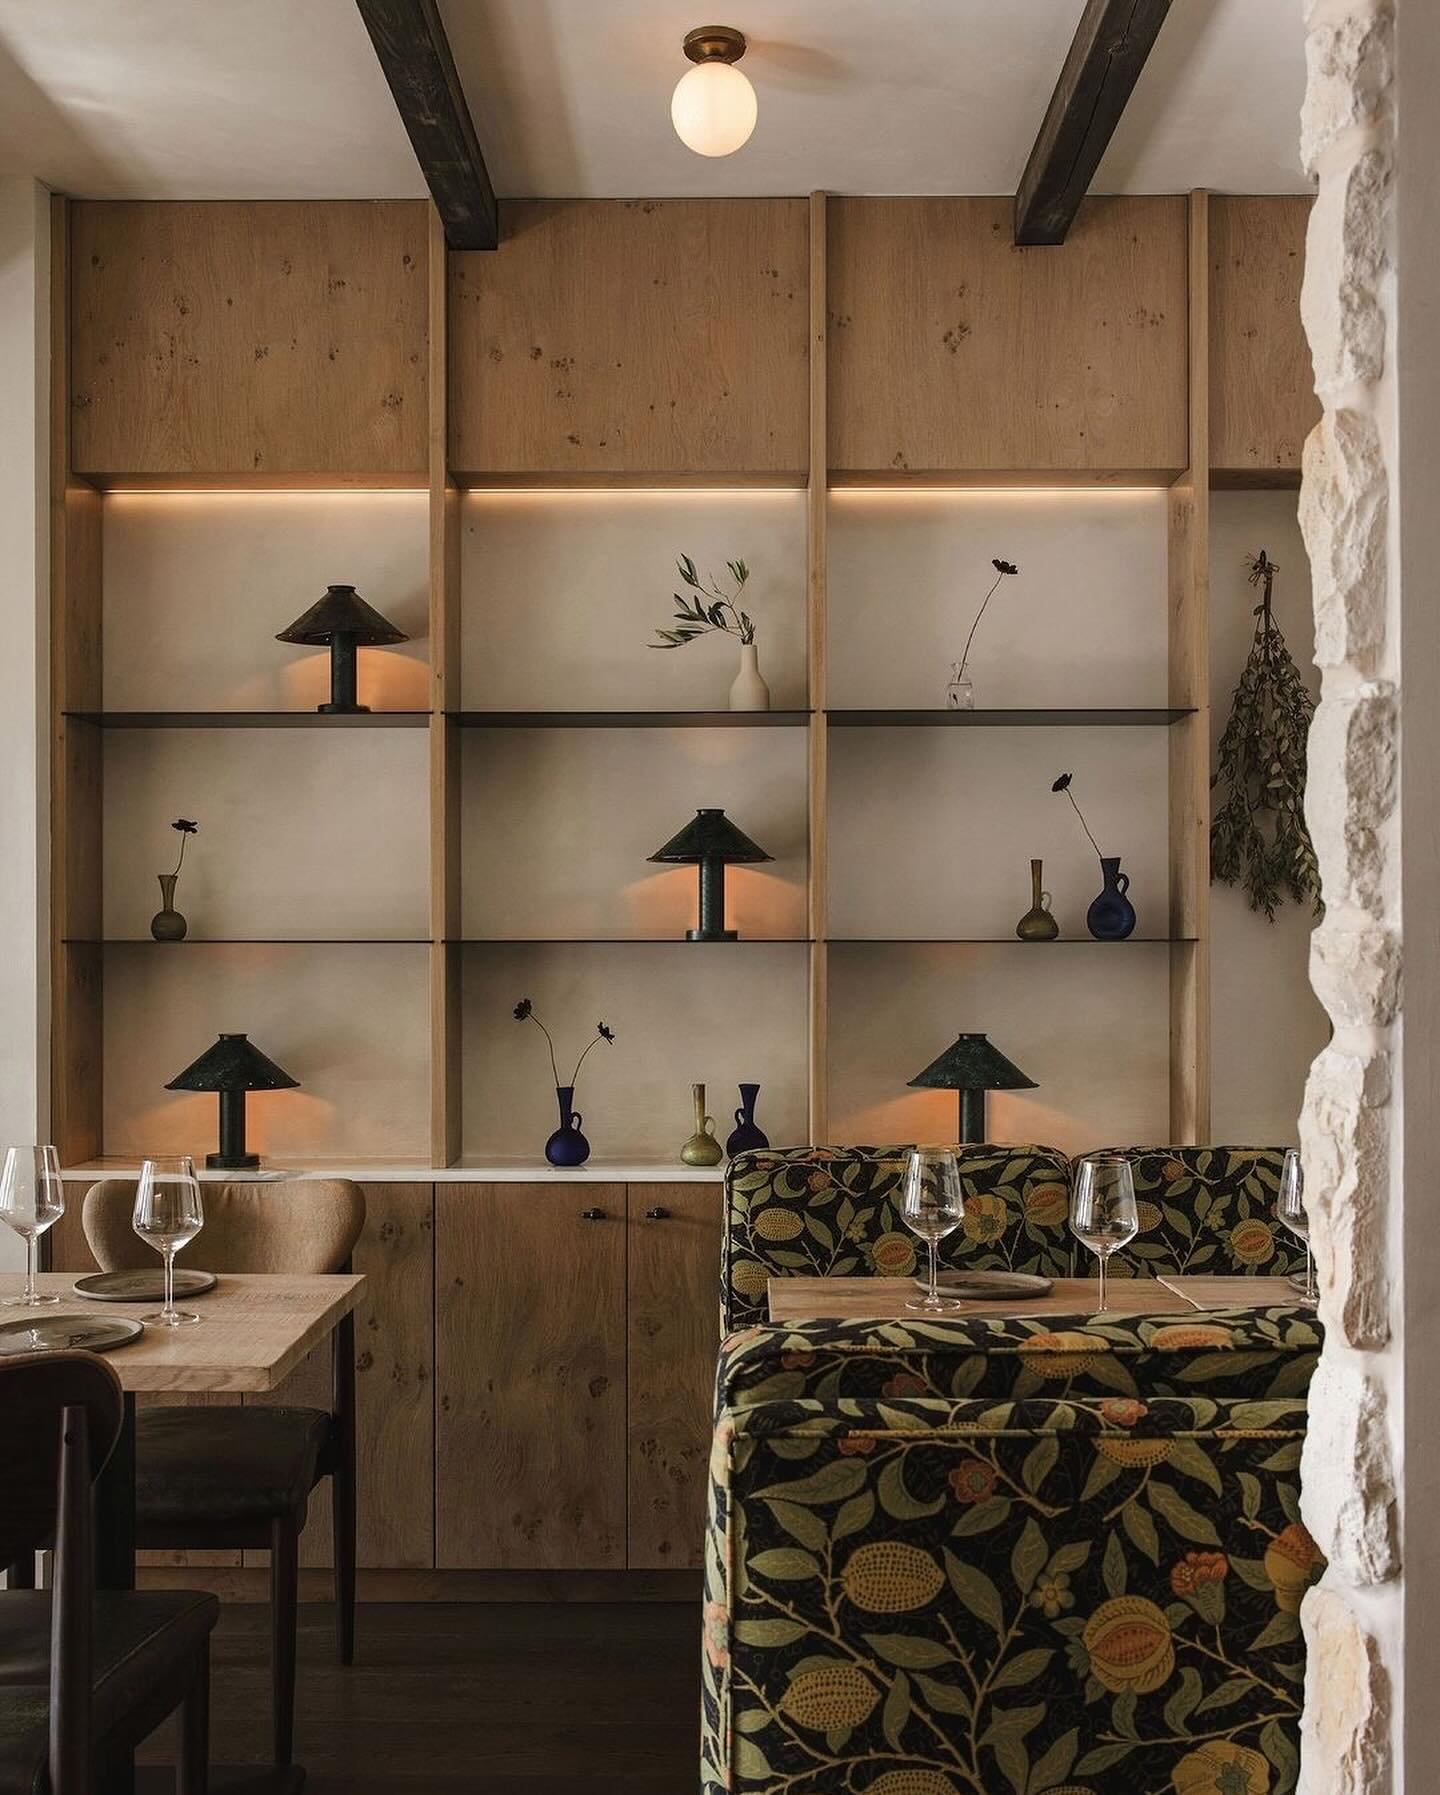 This restaurant was designed to elevate the guest experience with its textured fabrics and elegant lighting - when thinking about your own home, it&rsquo;s important to consider not only how you want it to look, but also feel. 🍷🖤
⠀⠀⠀⠀⠀⠀⠀⠀⠀
⠀⠀⠀⠀⠀⠀⠀⠀